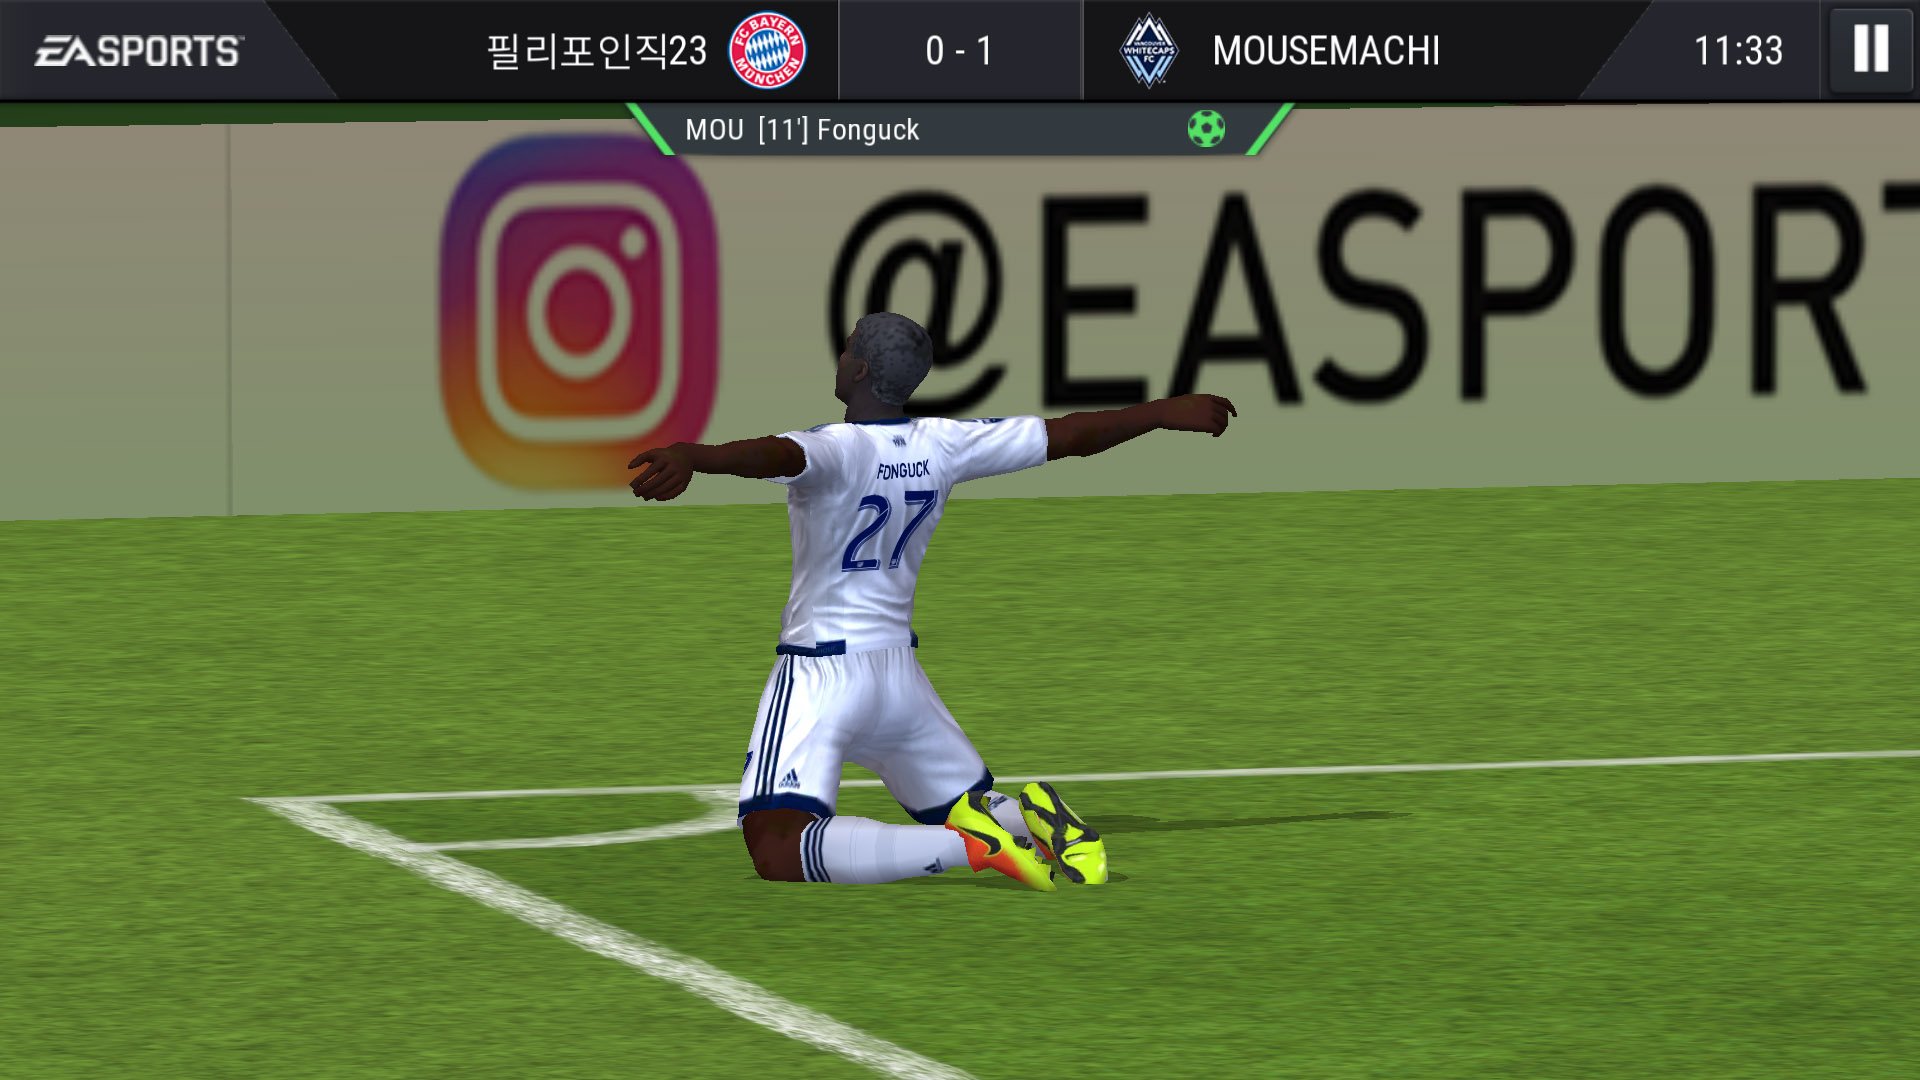 How To Do A Bicycle Kick In Fifa Mobile - Bicycling and ...